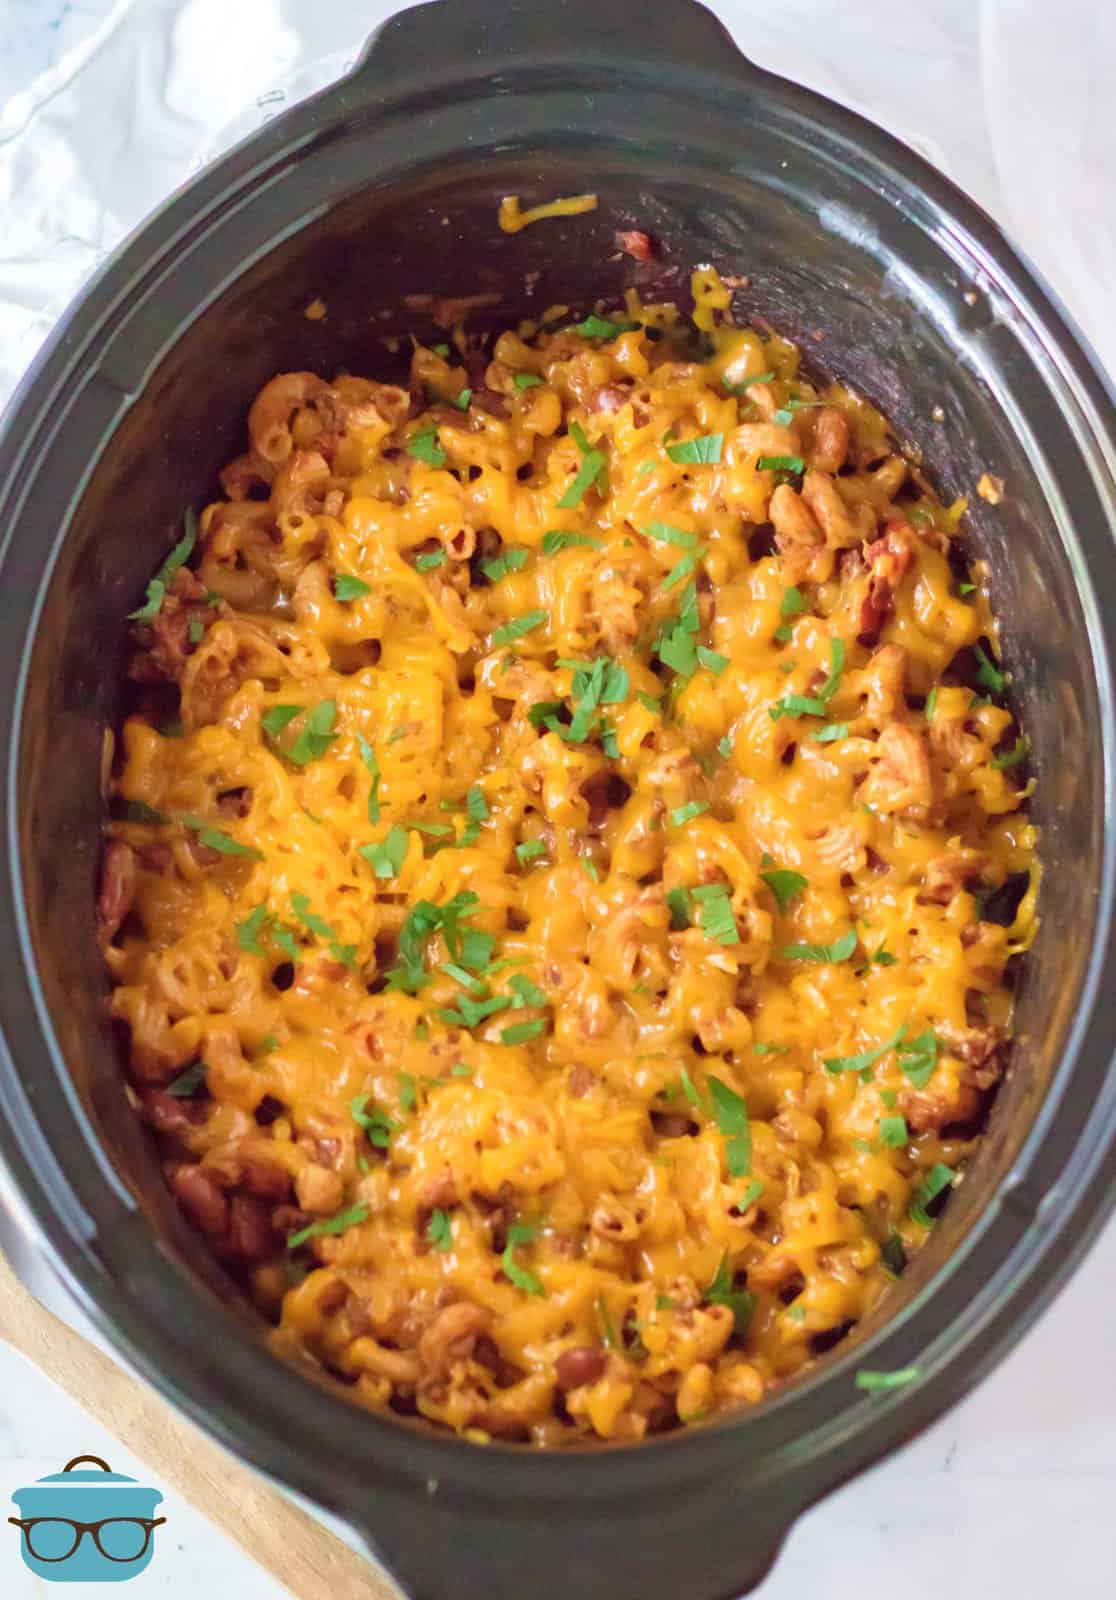 Finished Slow Cooker Chili Mack in crock pot with melted cheese and parsley.